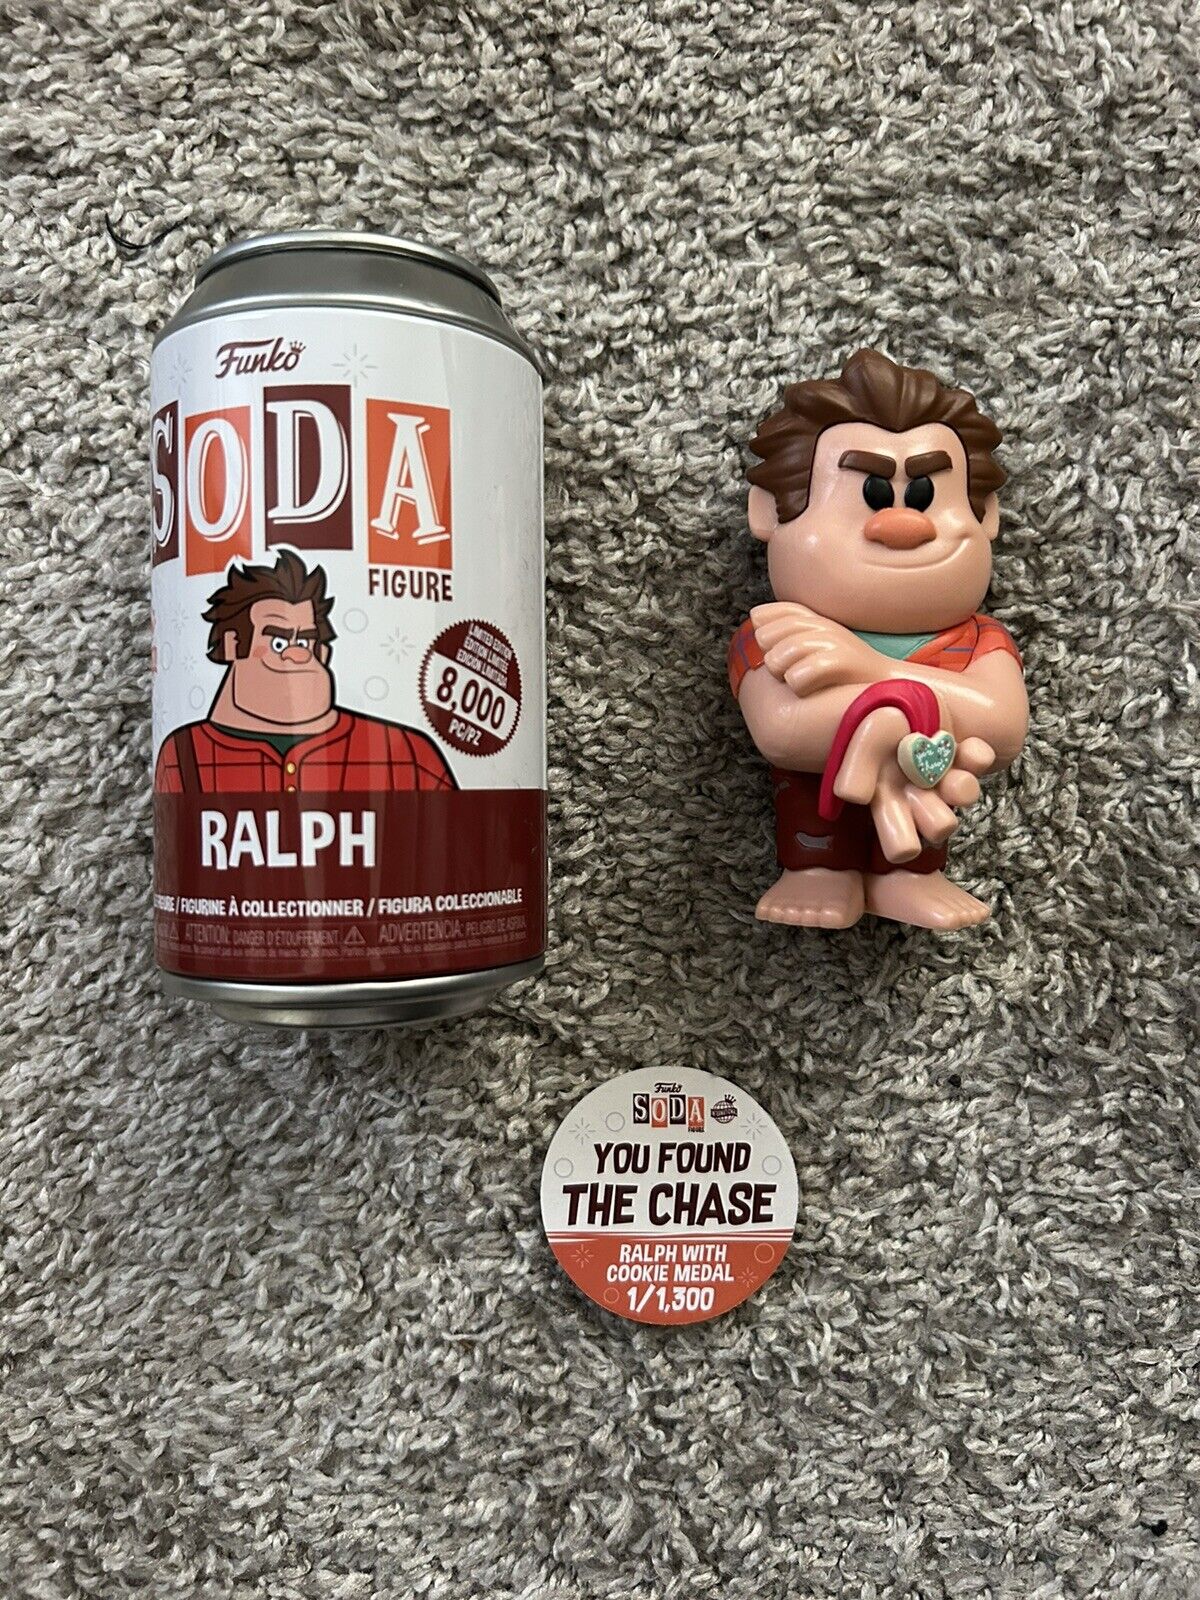 Funko Soda - Wreck-it Ralph - Ralph with Cookie Medal 1/1300 International Chase